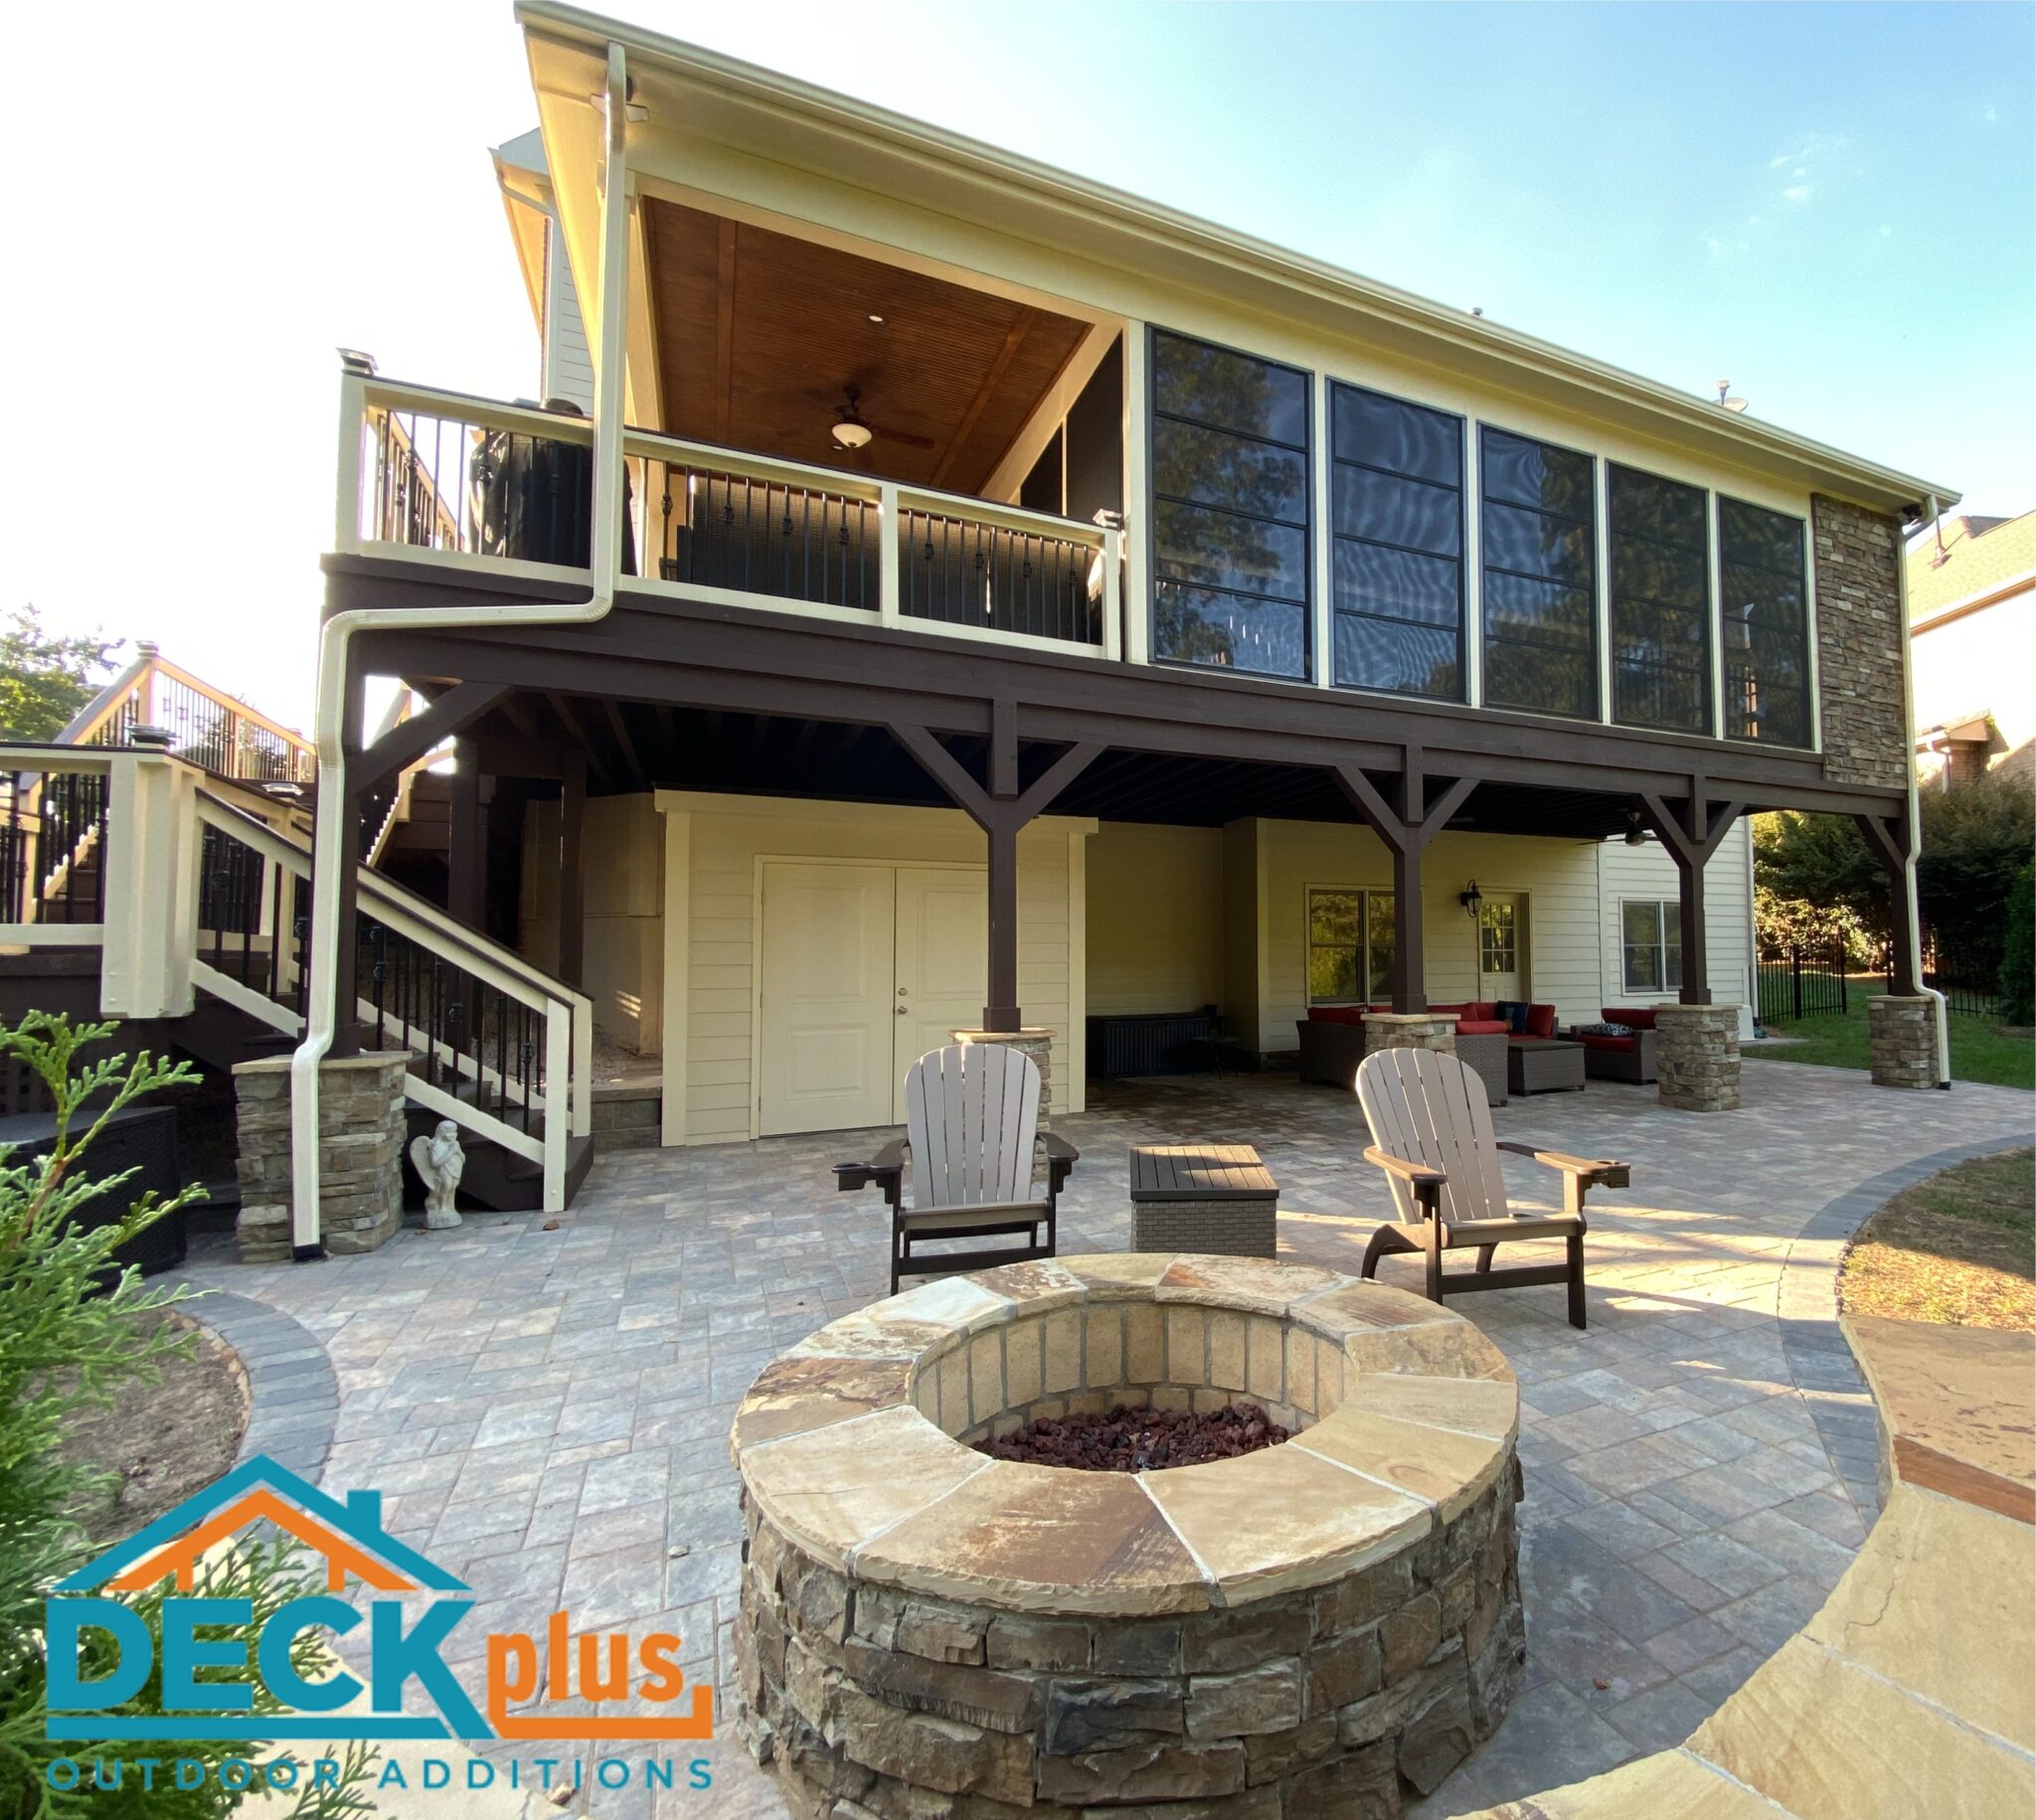 Deck Plus Gets High Marks From Houzz 4 Years In A Row!